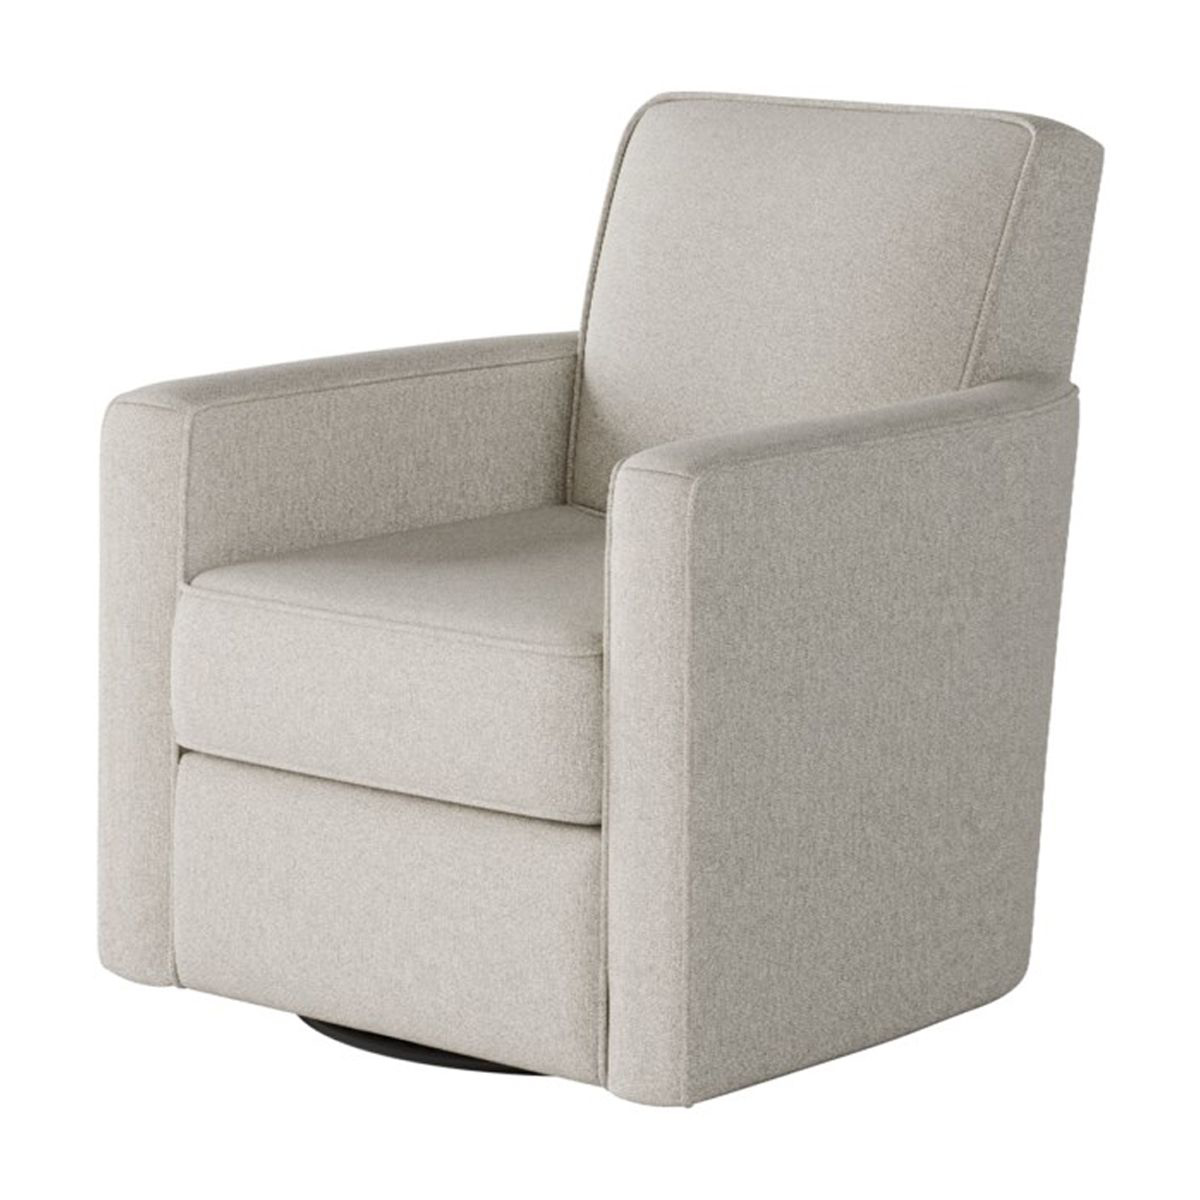 Recliners and Chairs | CUSTOM 402 SW GLIDER CHAIR | Lifestyle Furniture ...